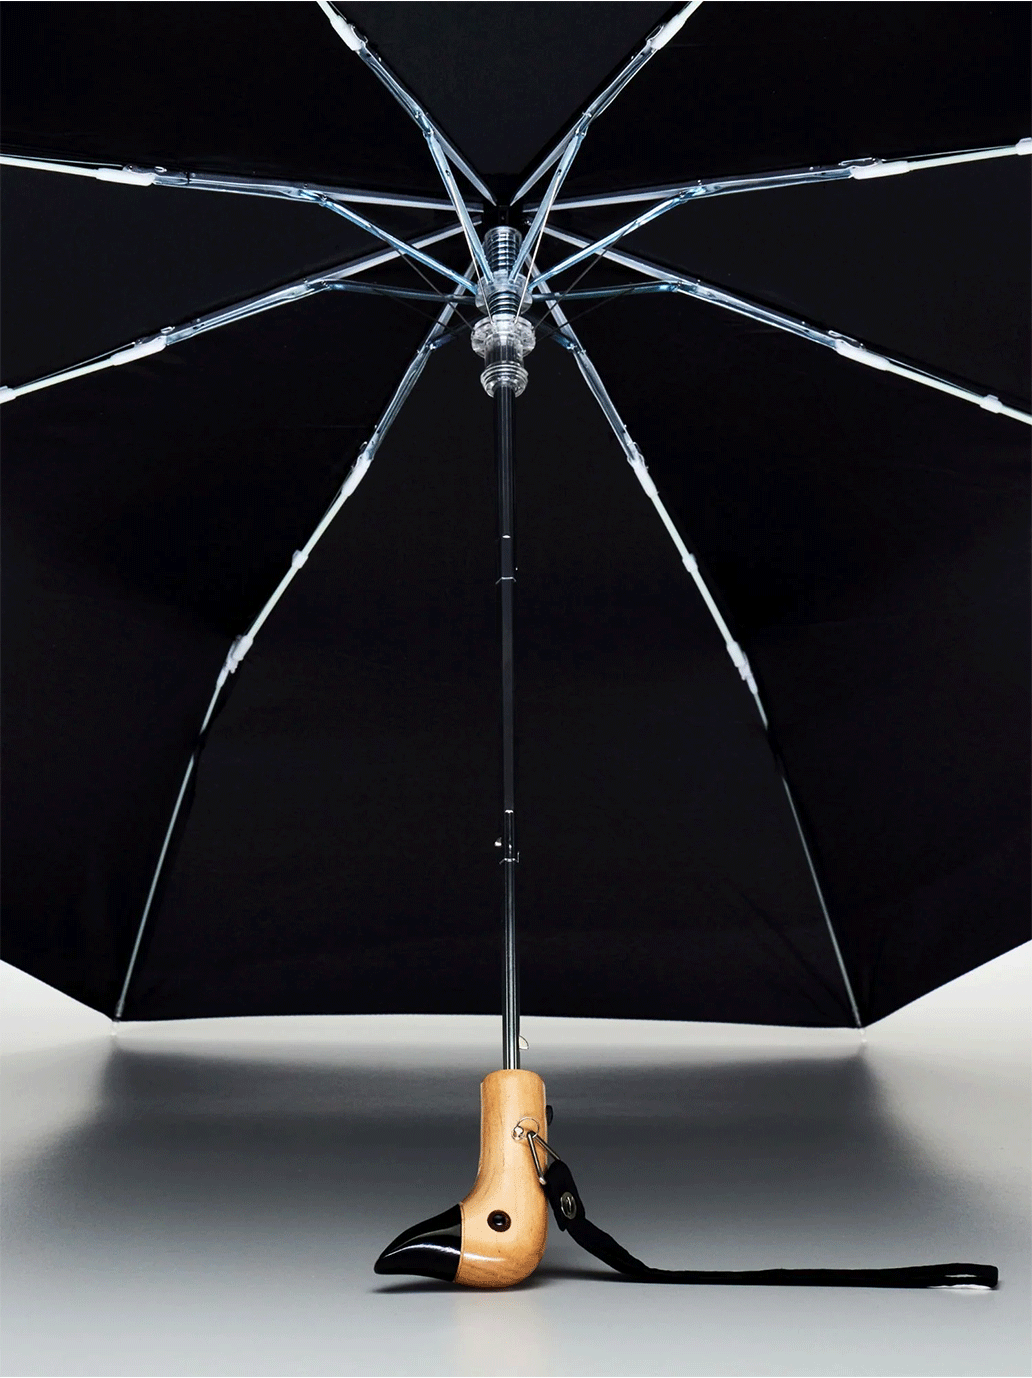 Umbrella made of recycled fabric